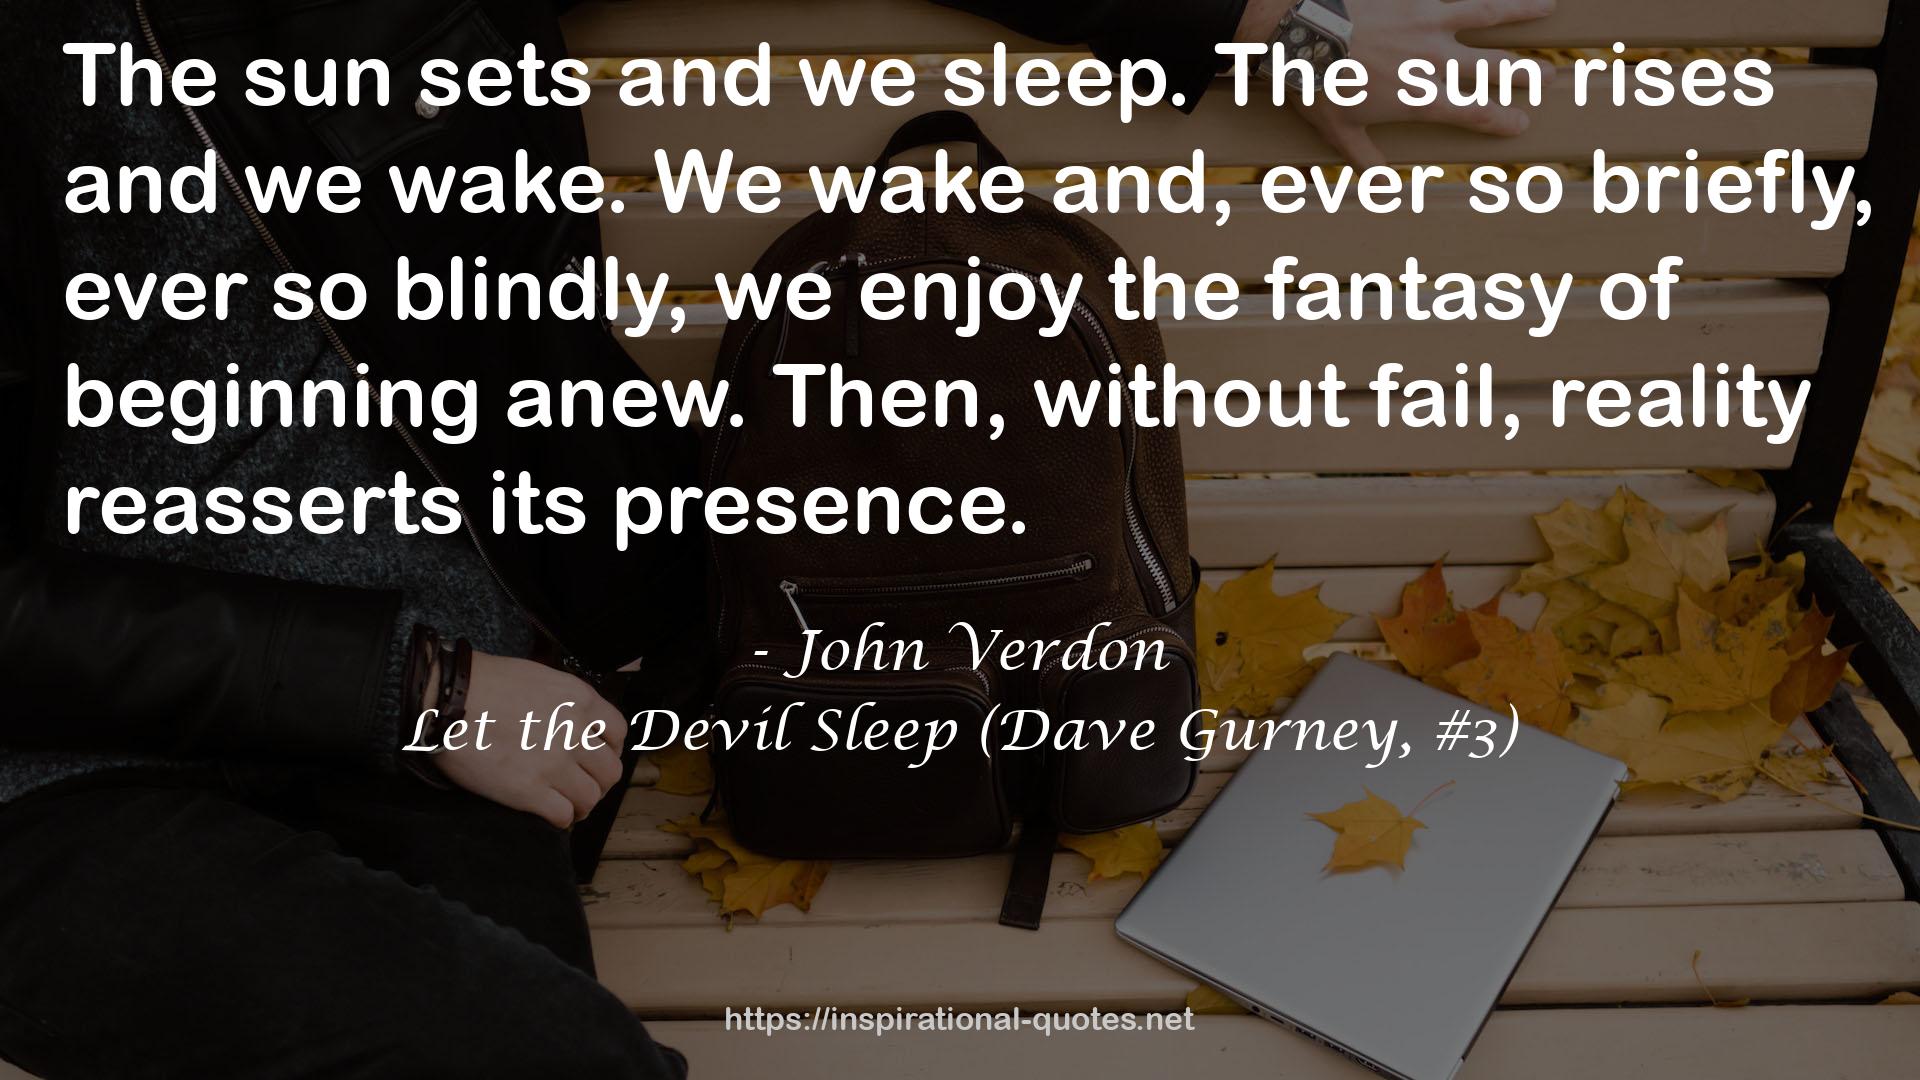 Let the Devil Sleep (Dave Gurney, #3) QUOTES